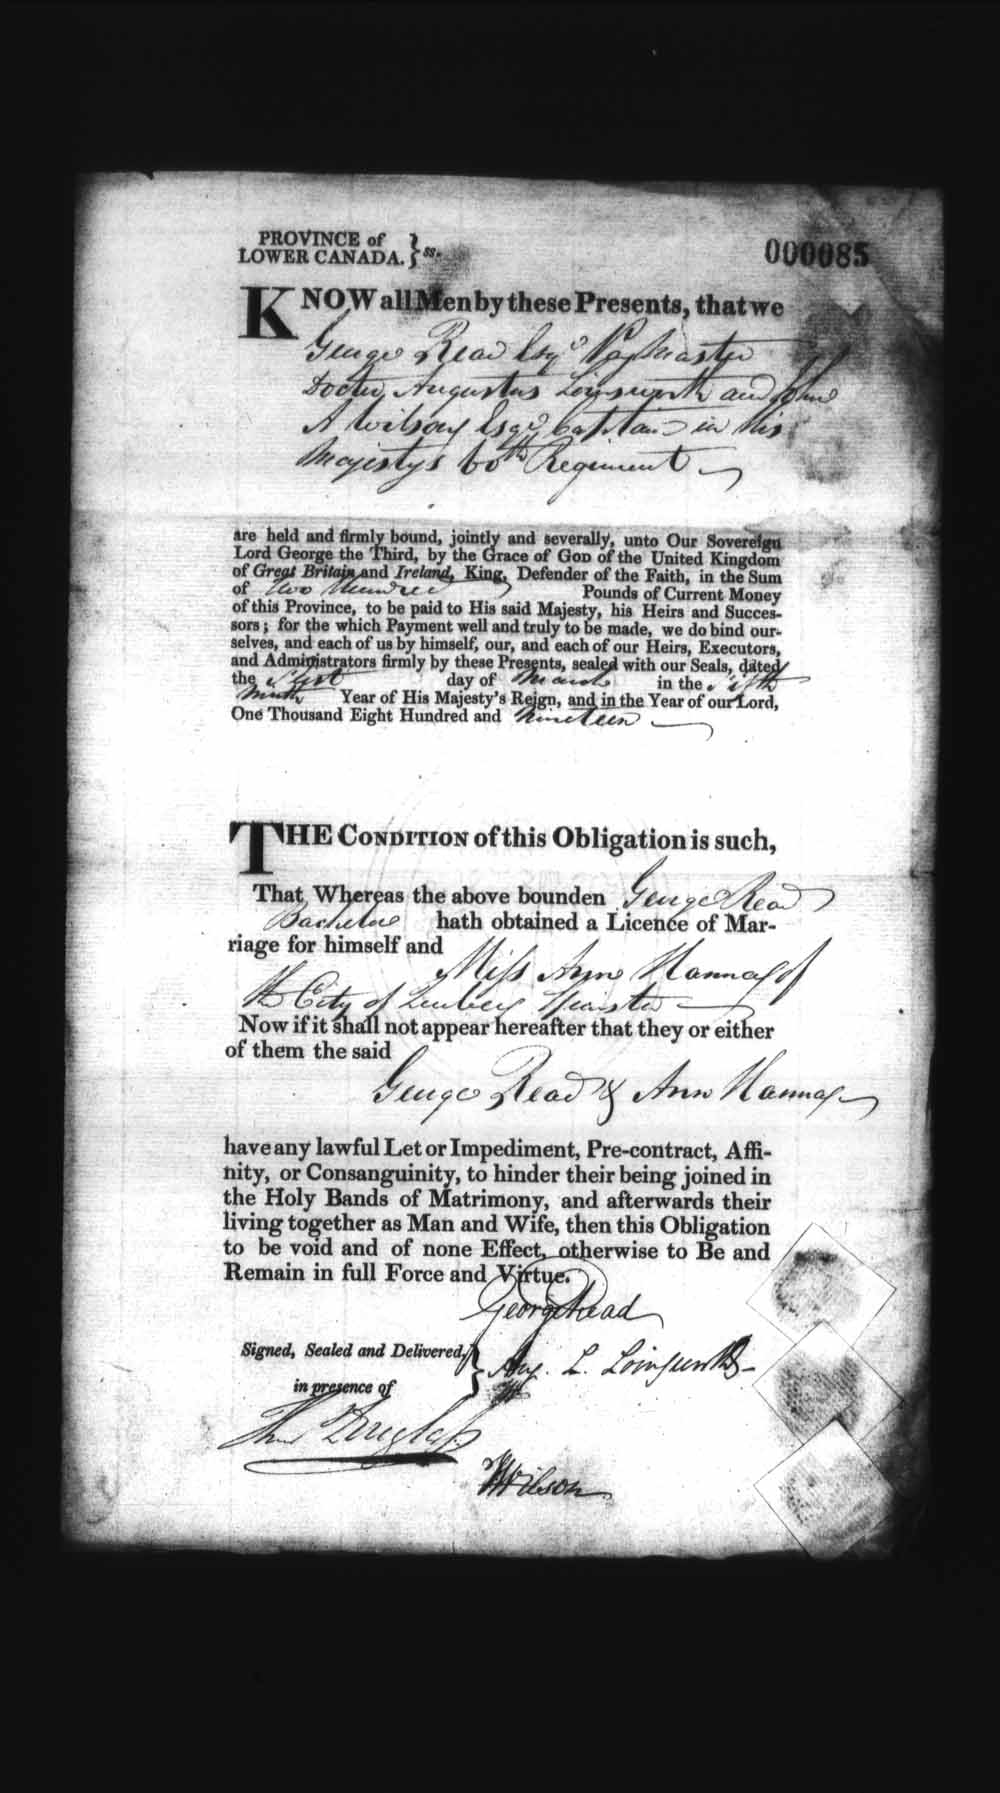 Digitized page of Upper and Lower Canada Marriage Bonds (1779-1865) for Image No.: e008235914